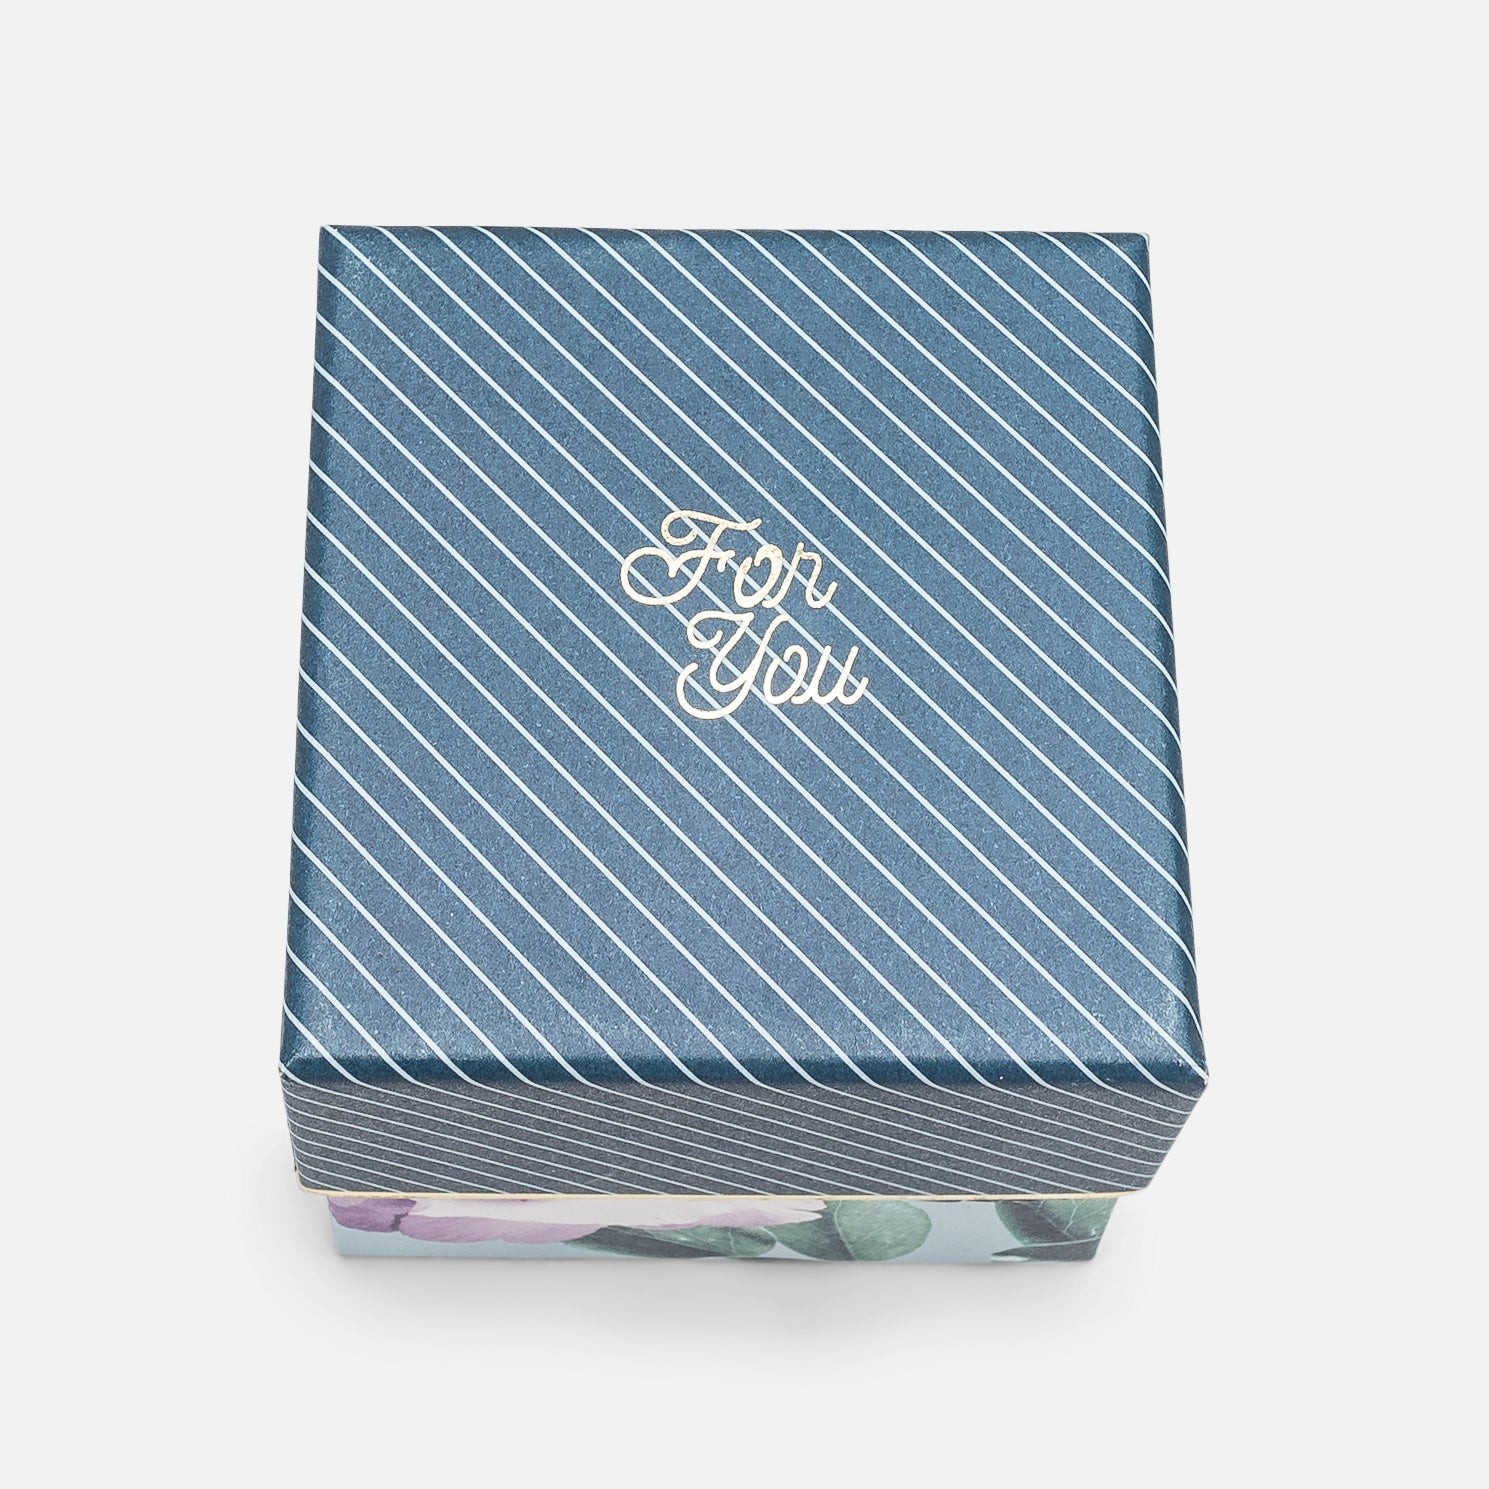 Box for watches and bracelets with stripes for operation enfant soleil 